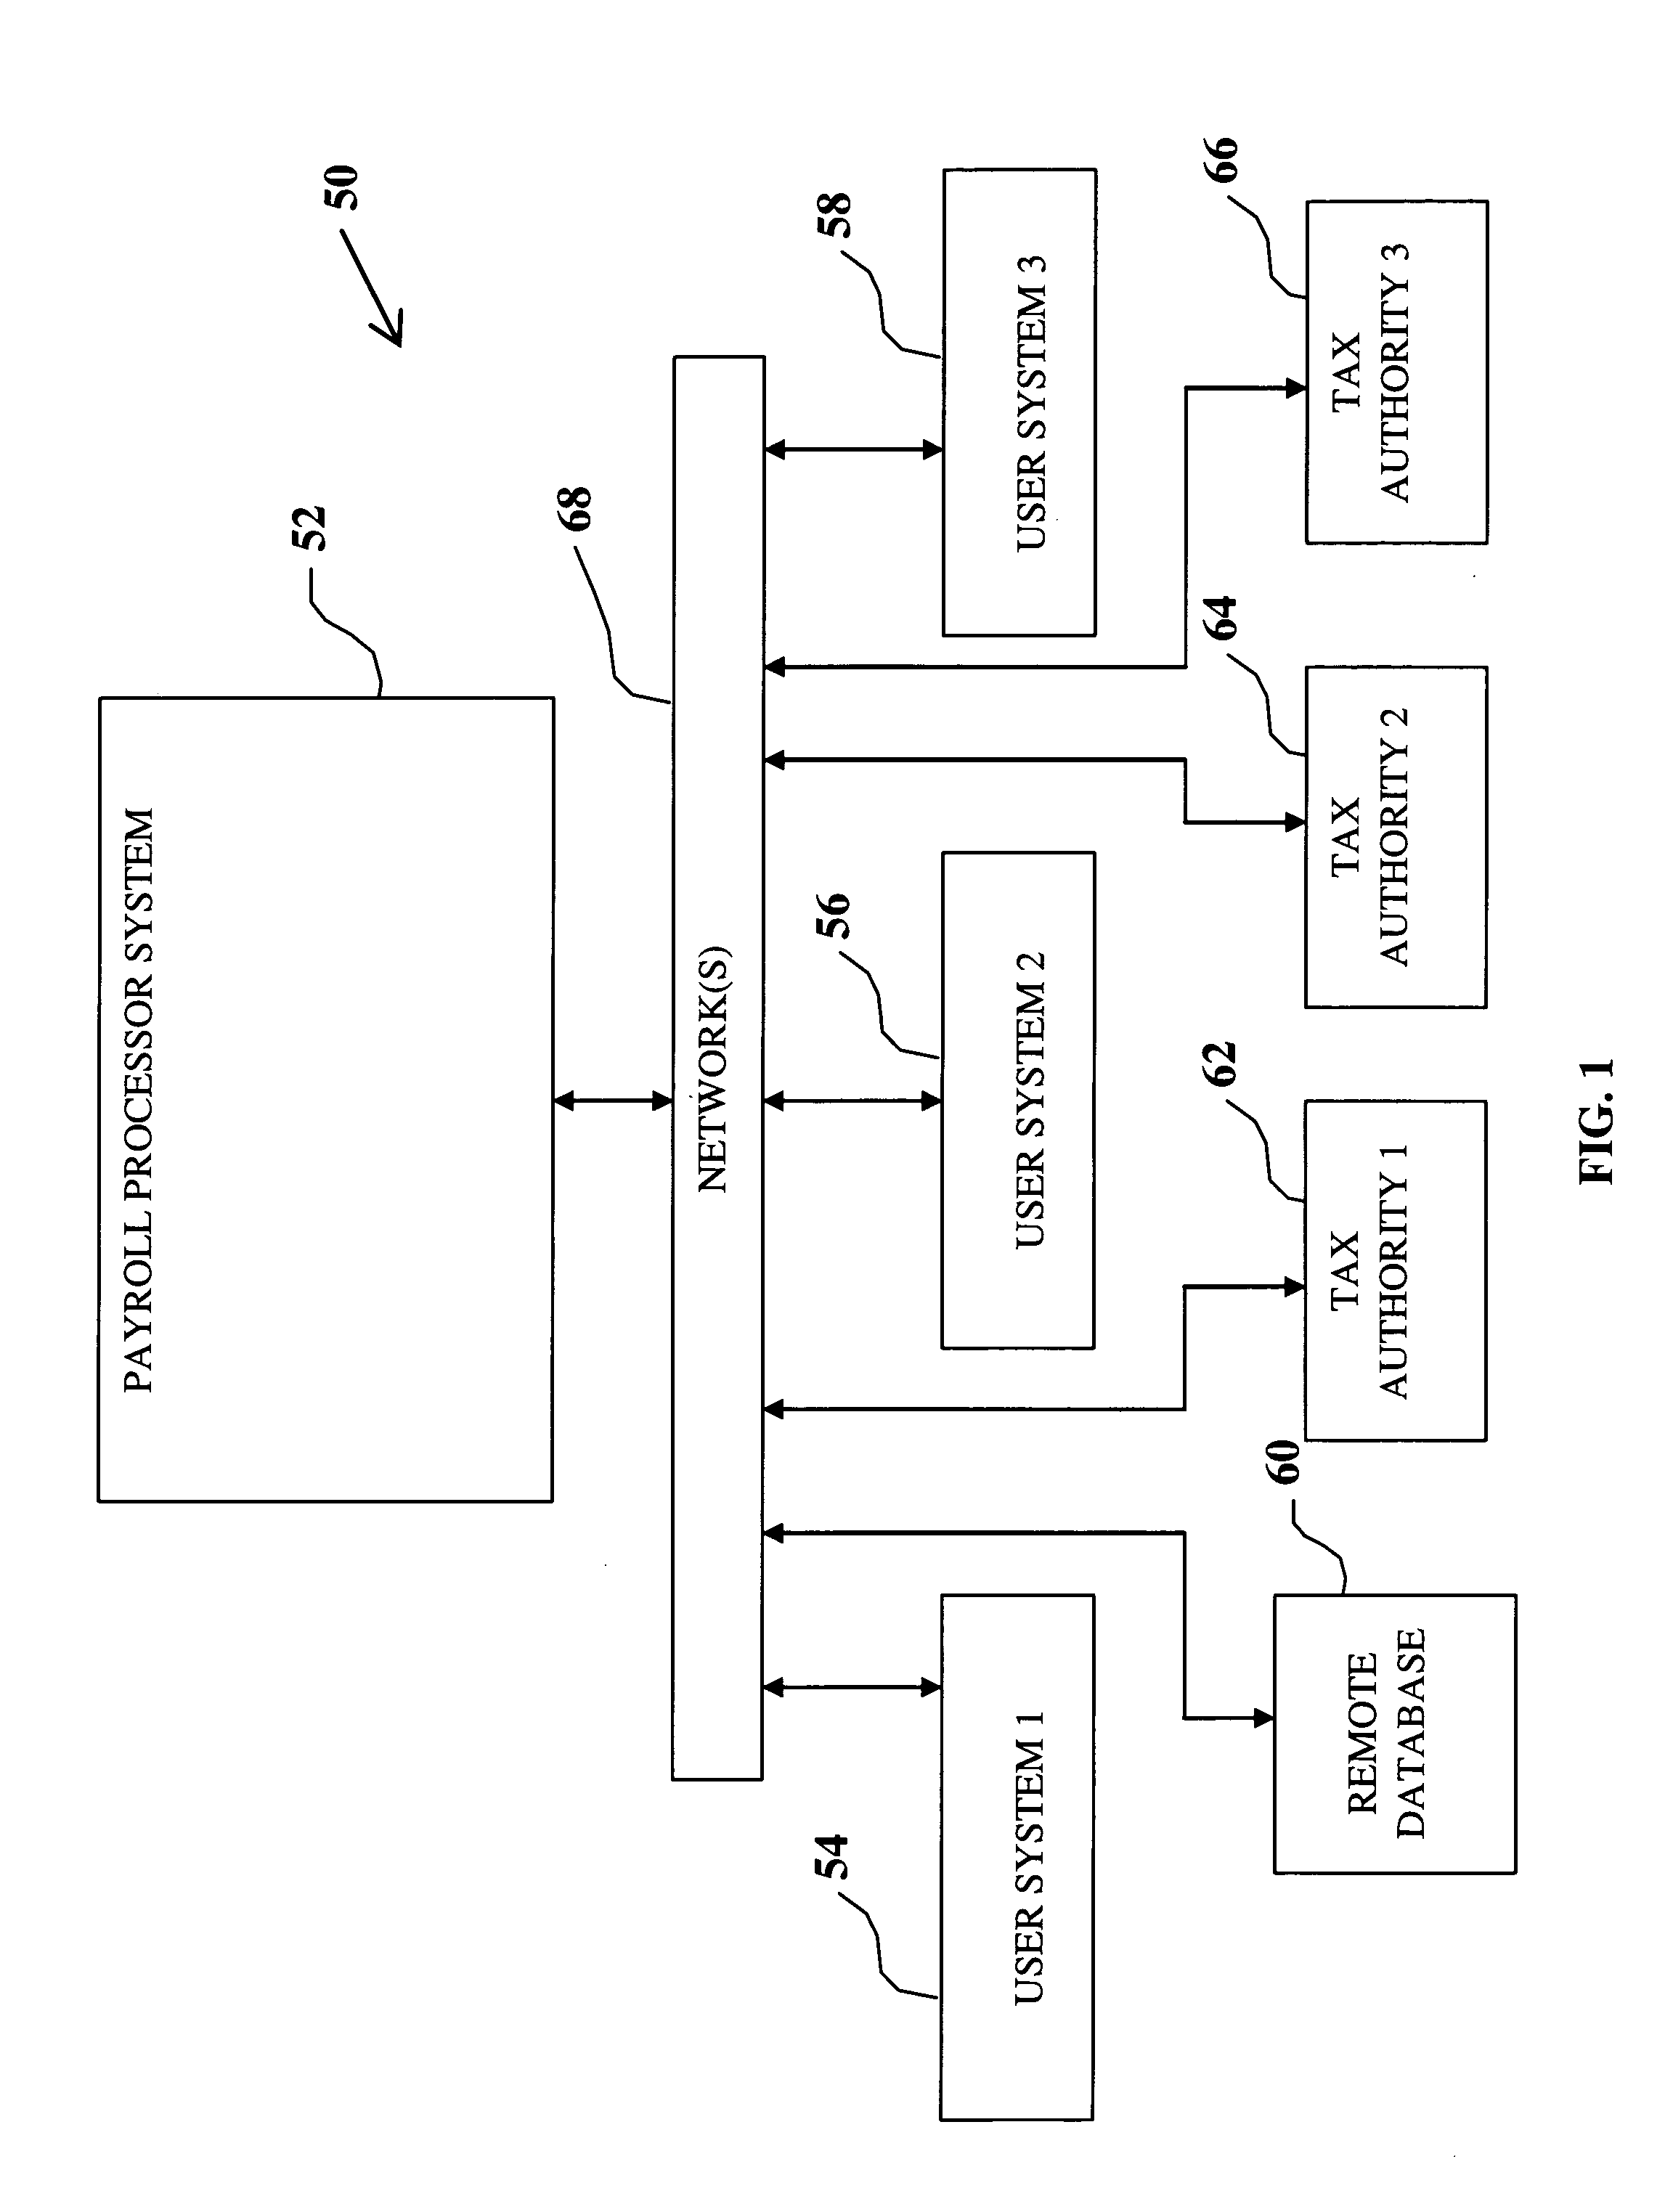 Payroll processor system and method